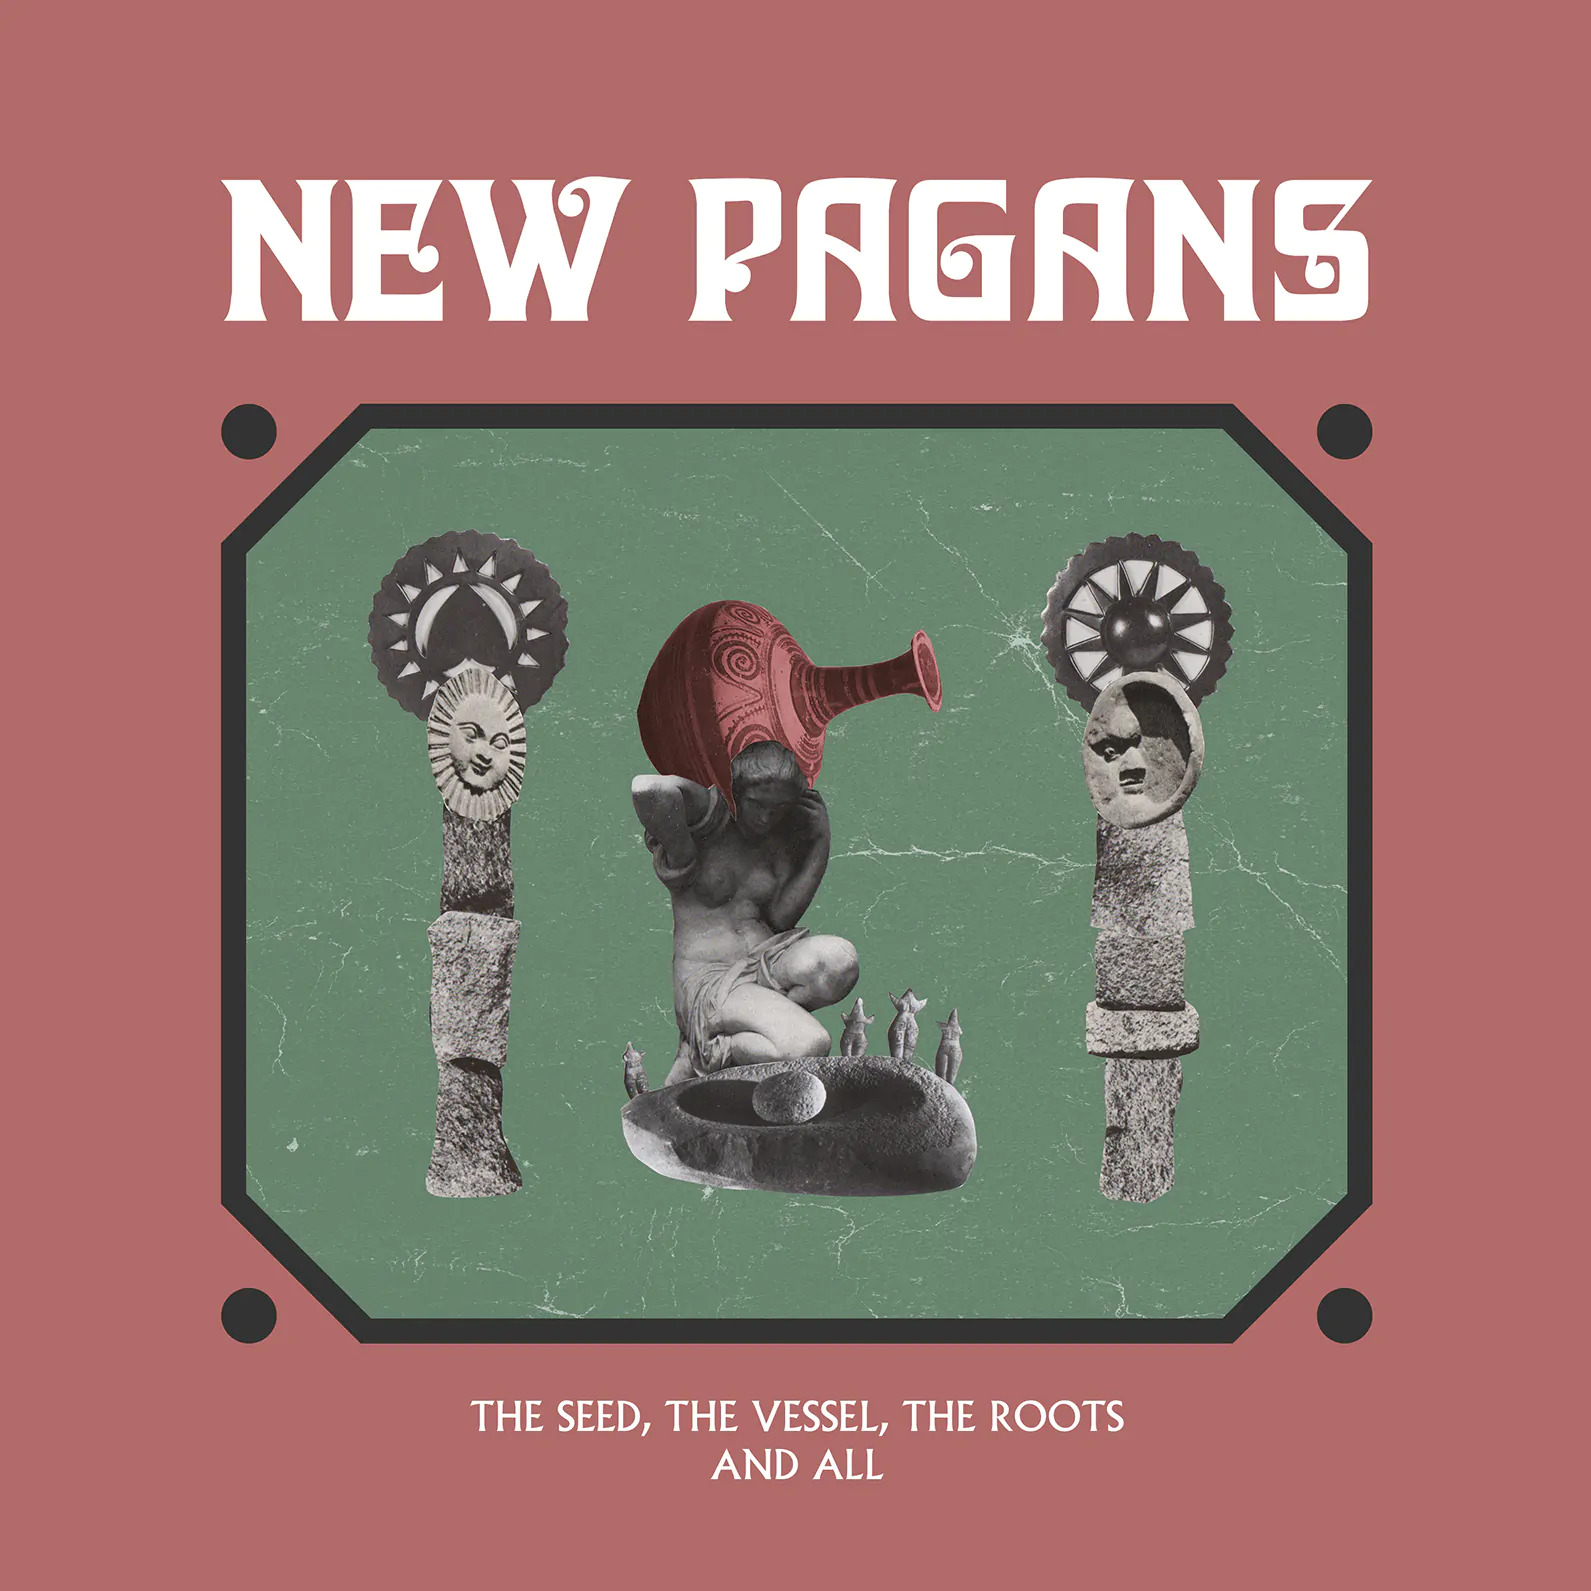 ALBUM REVIEW: New Pagans - The Seed, The Vessel, The Roots and All 